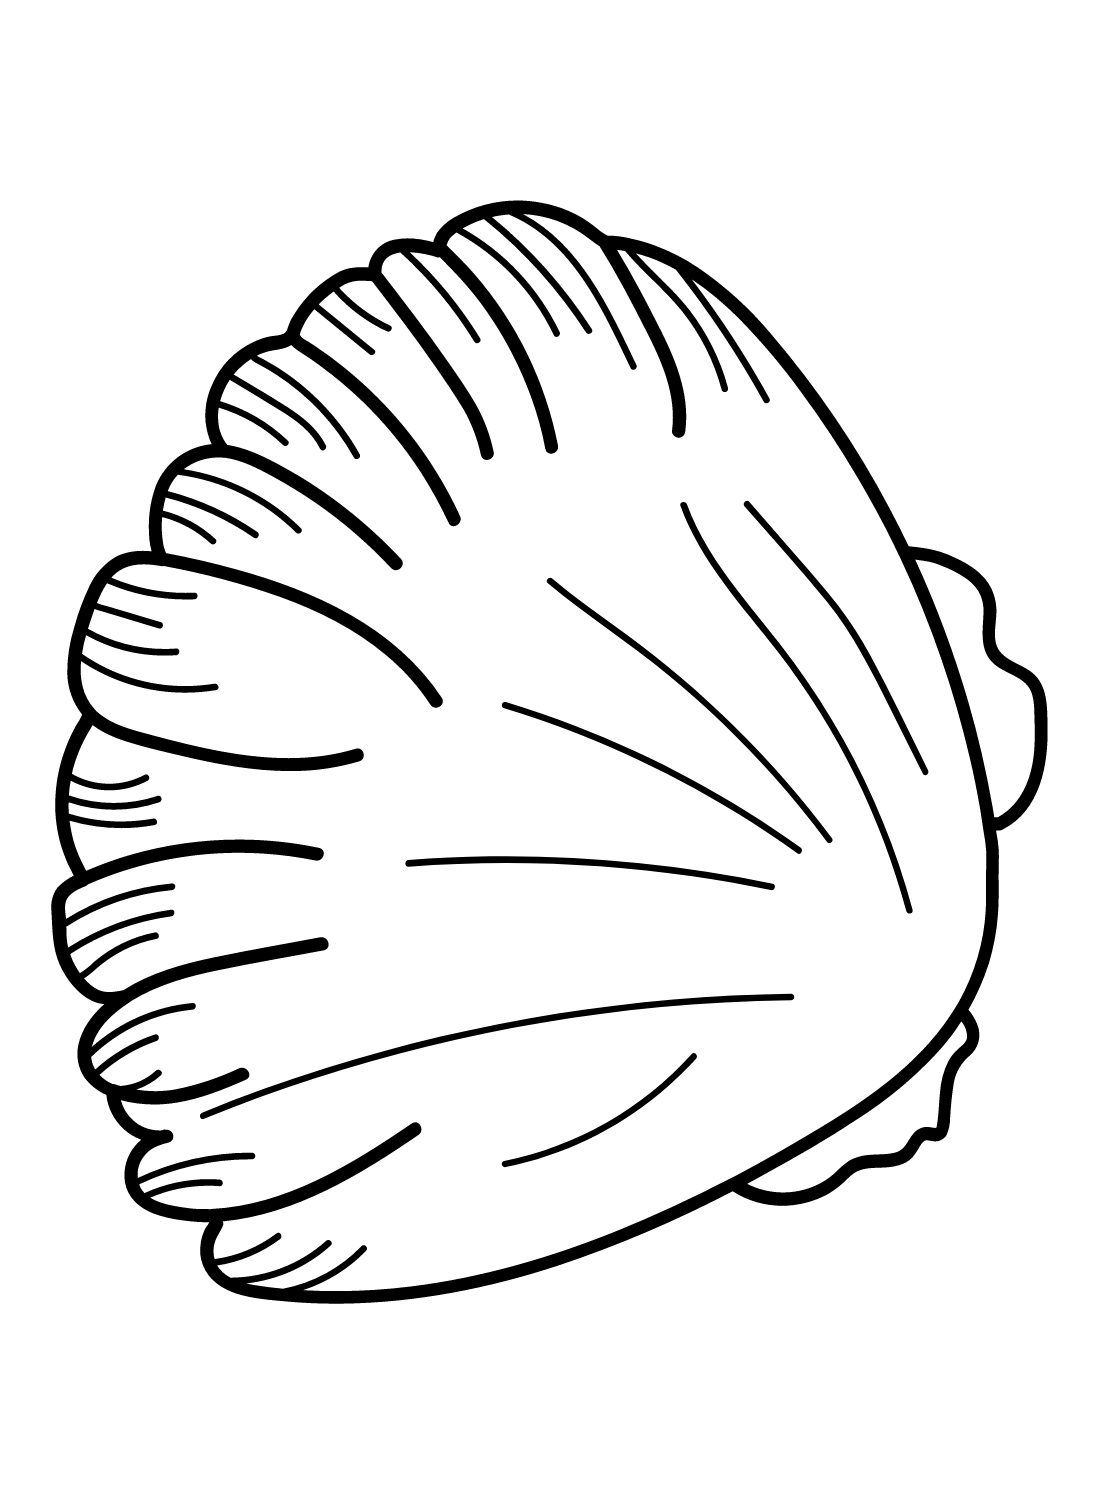 Painted Scallop Shells from Scallop